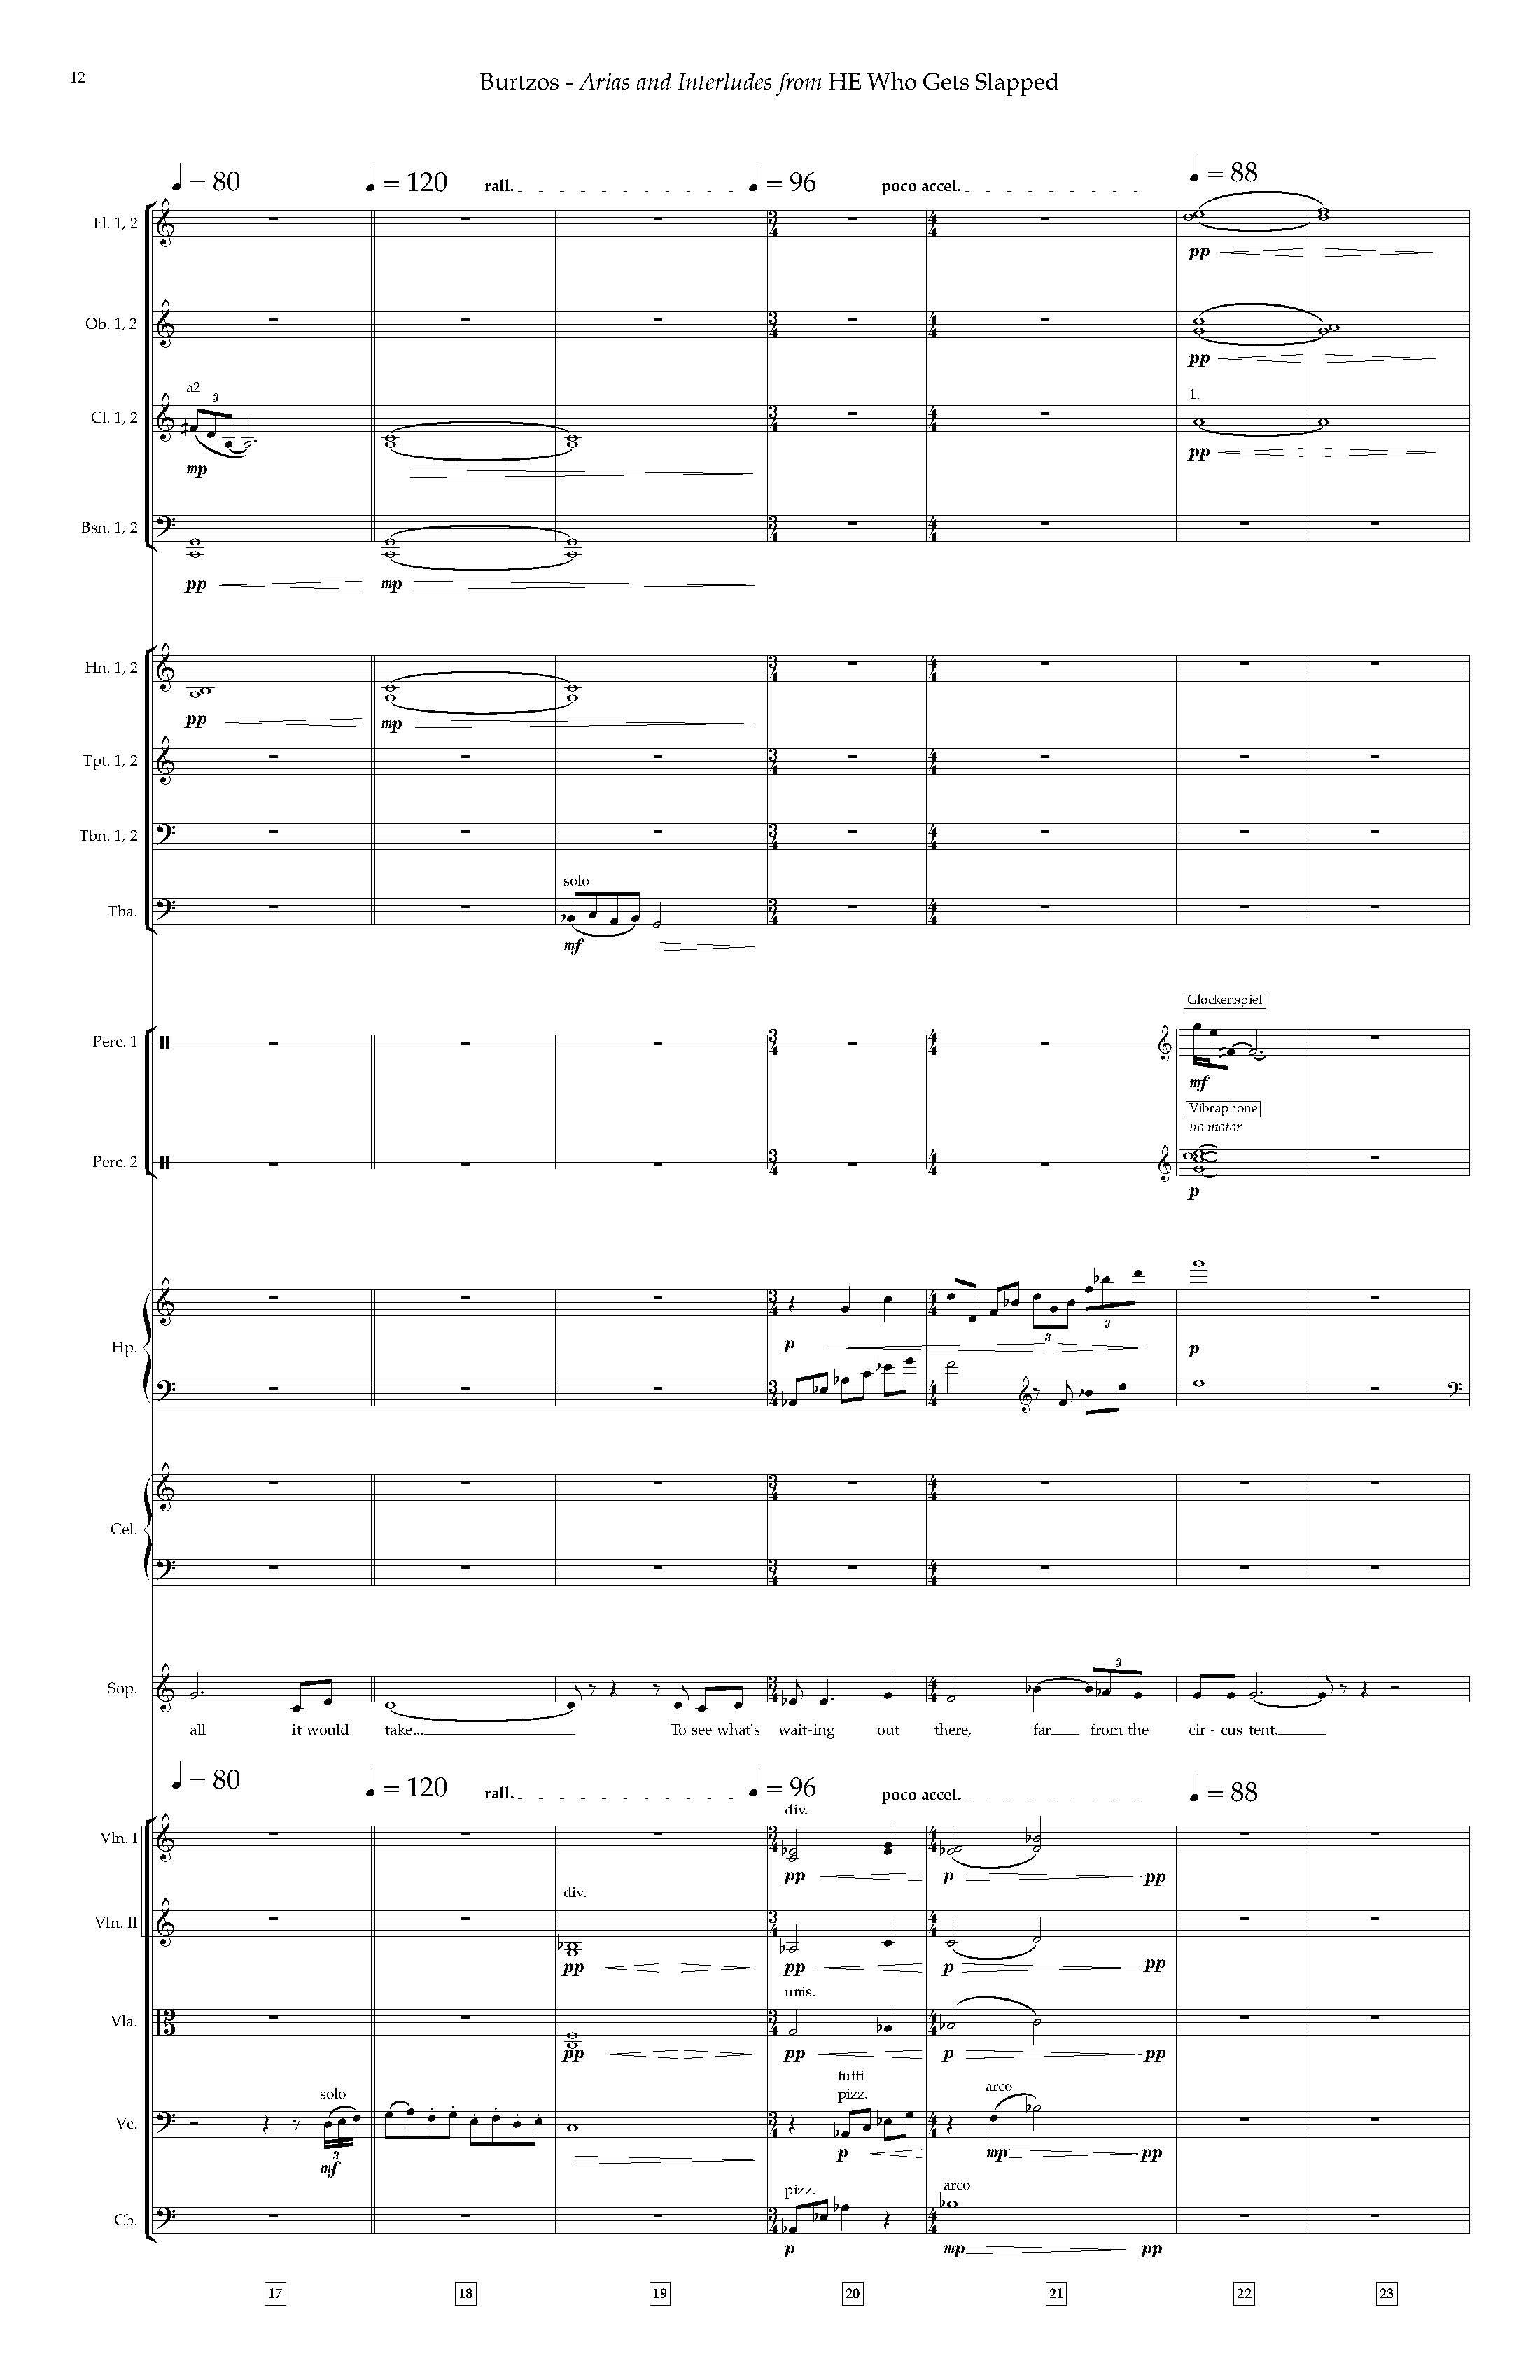 Arias and Interludes from HWGS - Complete Score_Page_18.jpg